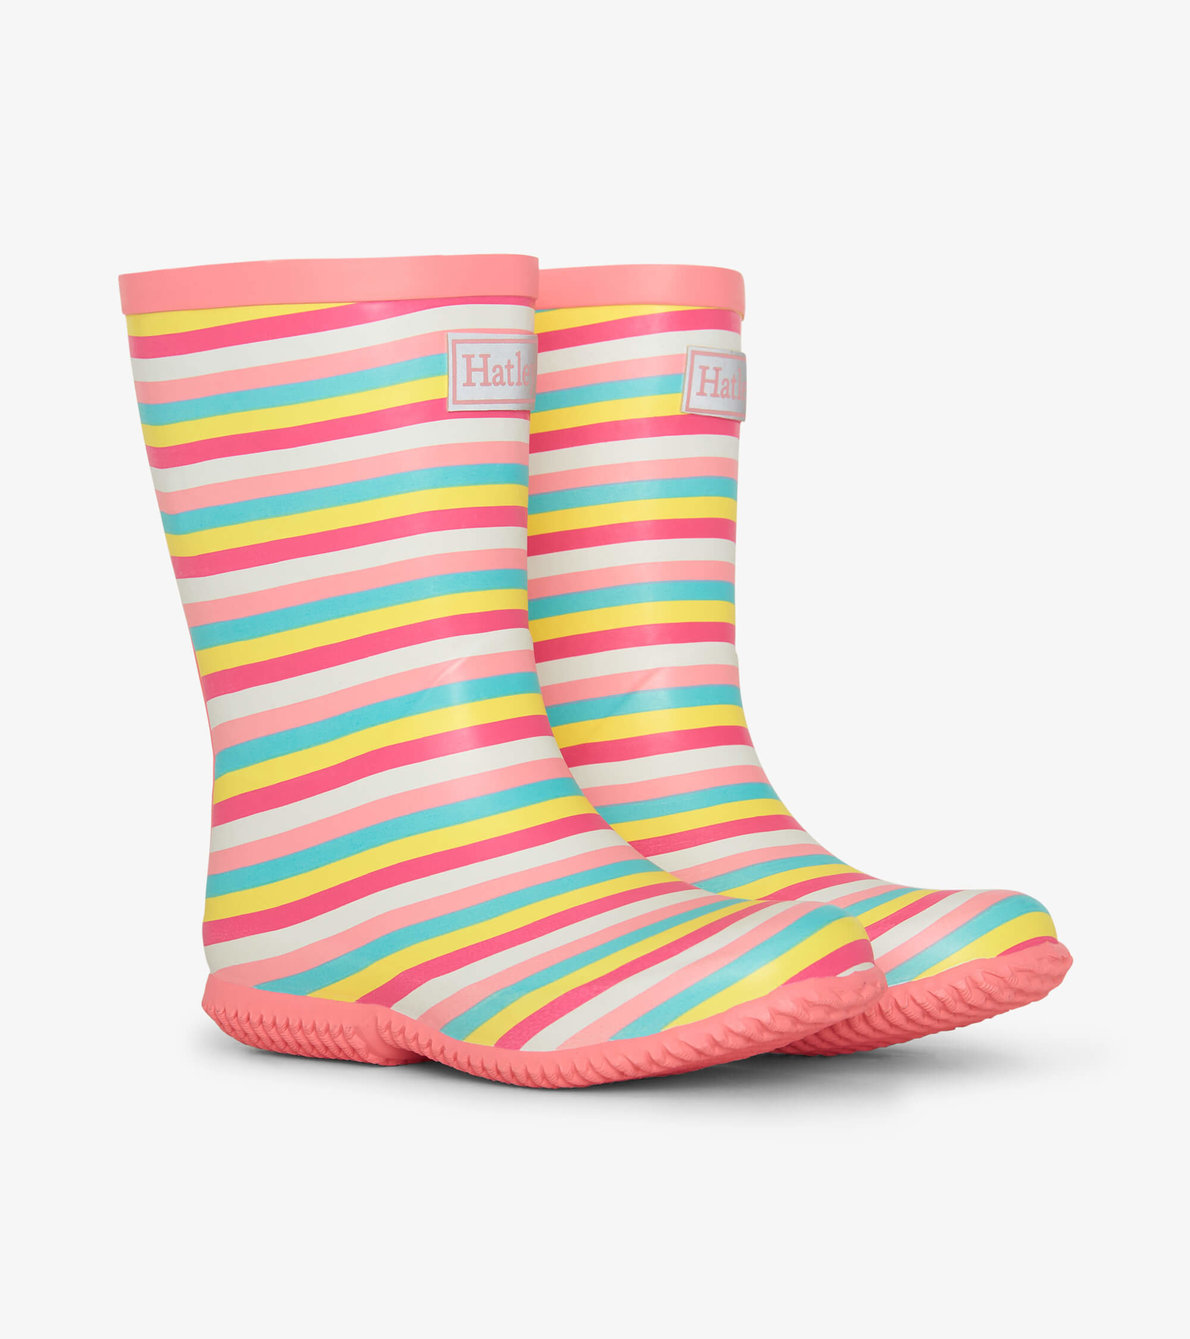 View larger image of Girls Pretty Stripes Packable Wellies